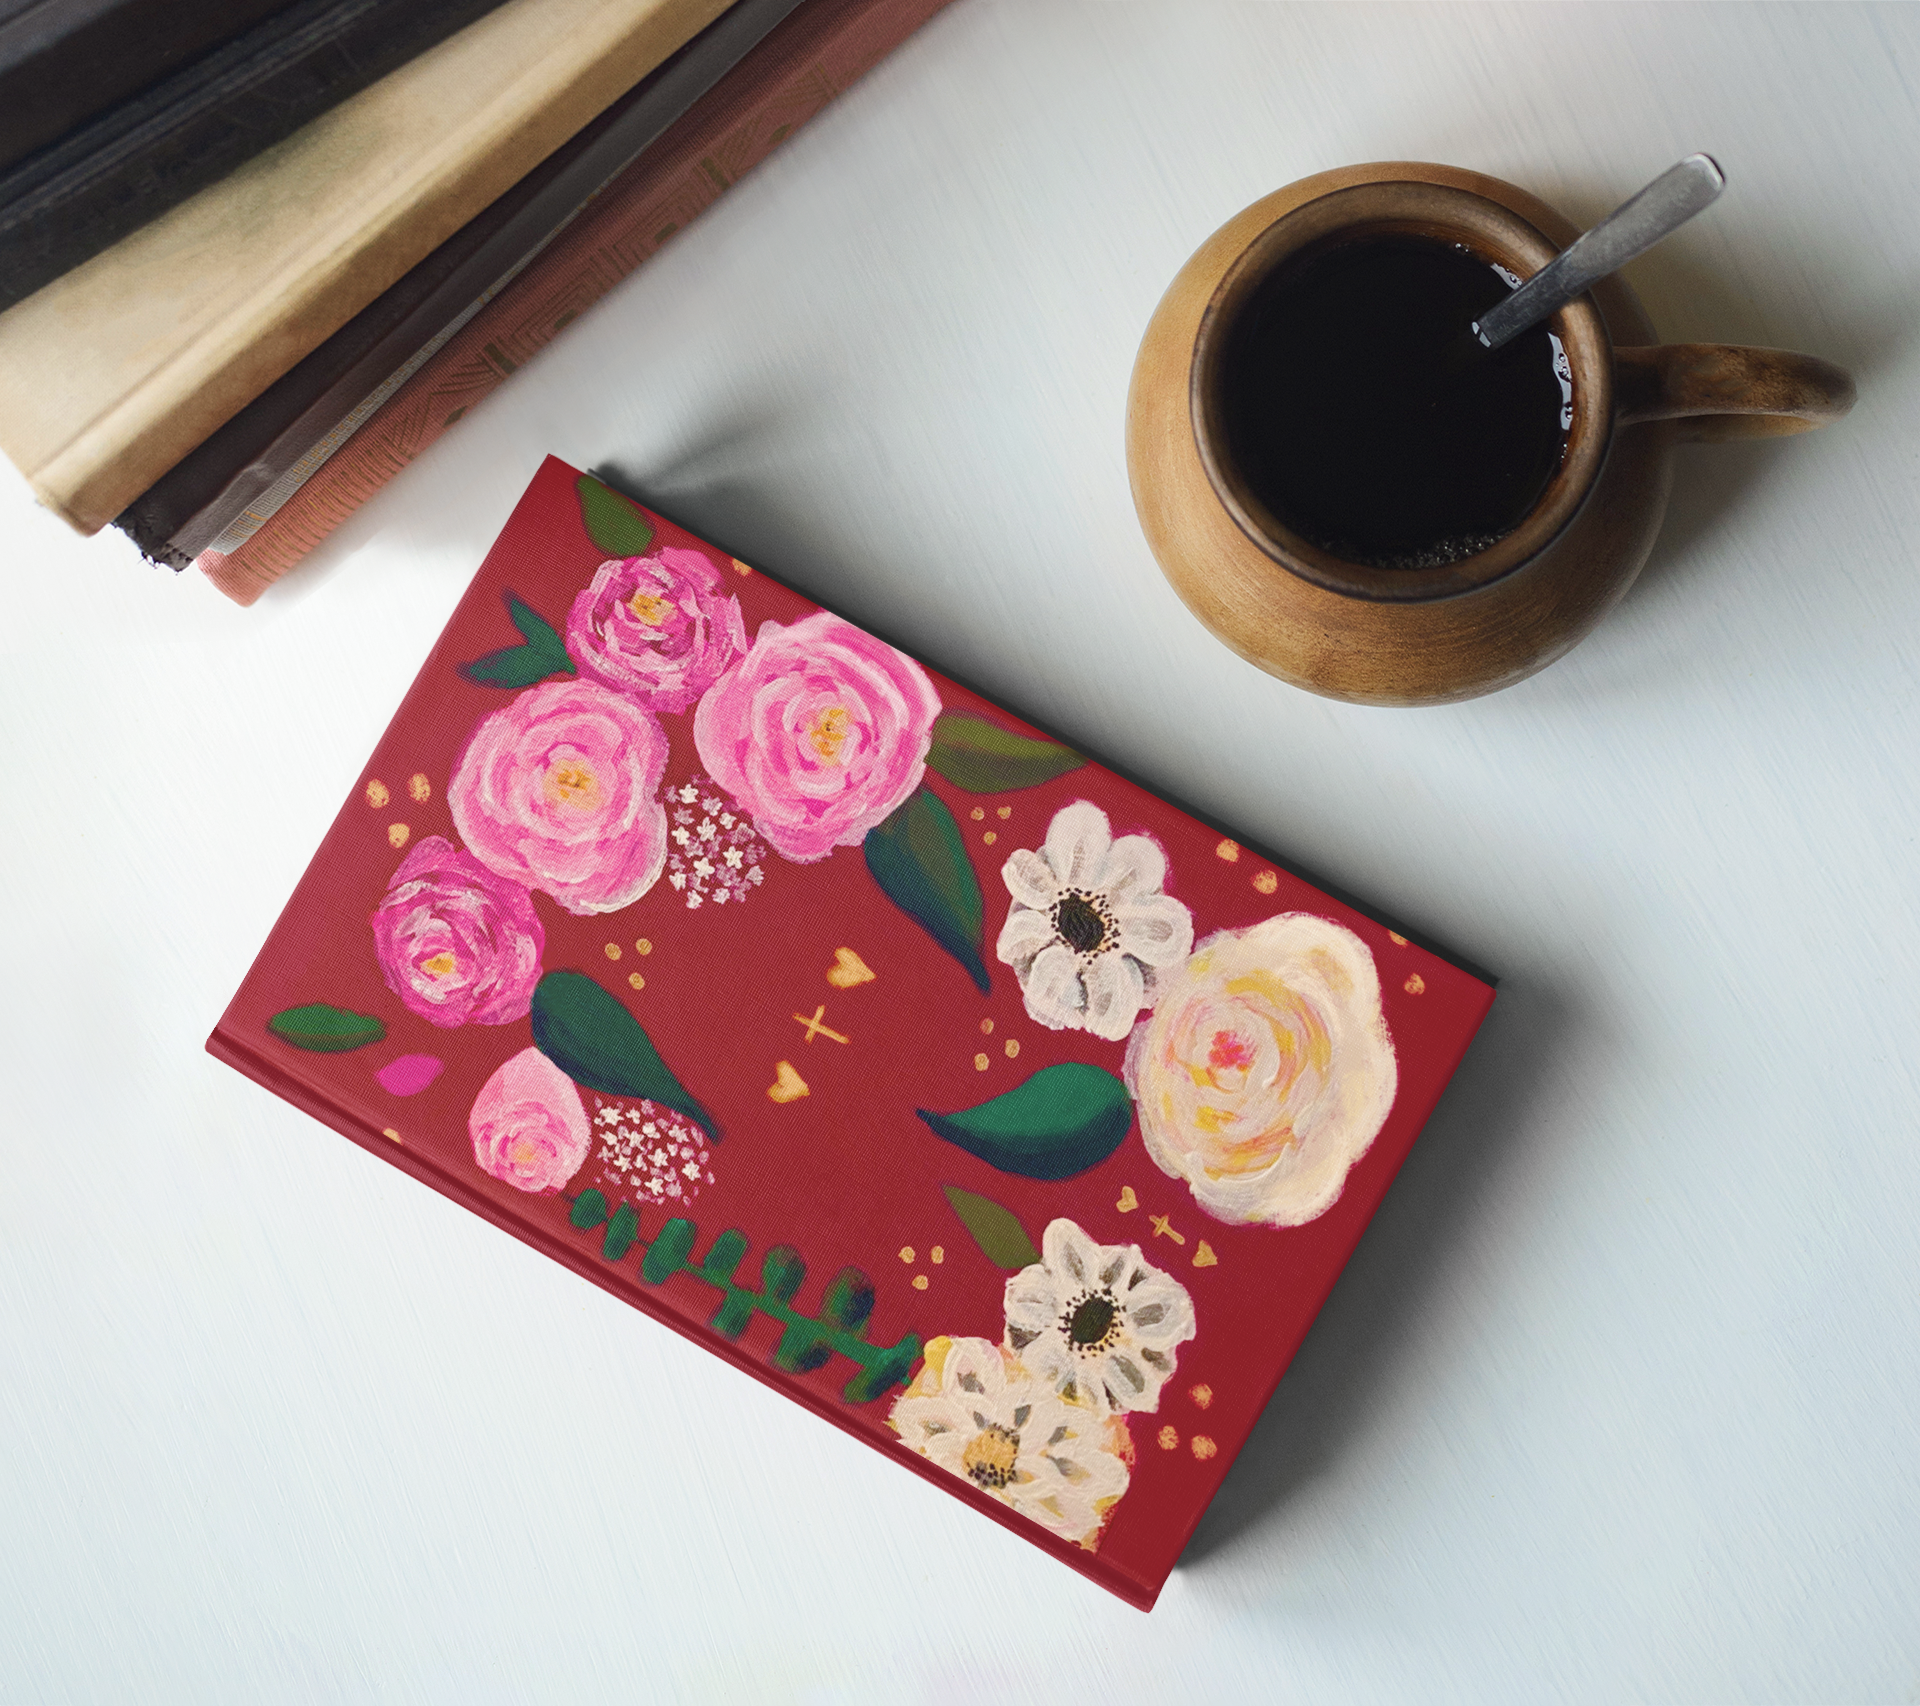 Floral Christian Journal with flowers